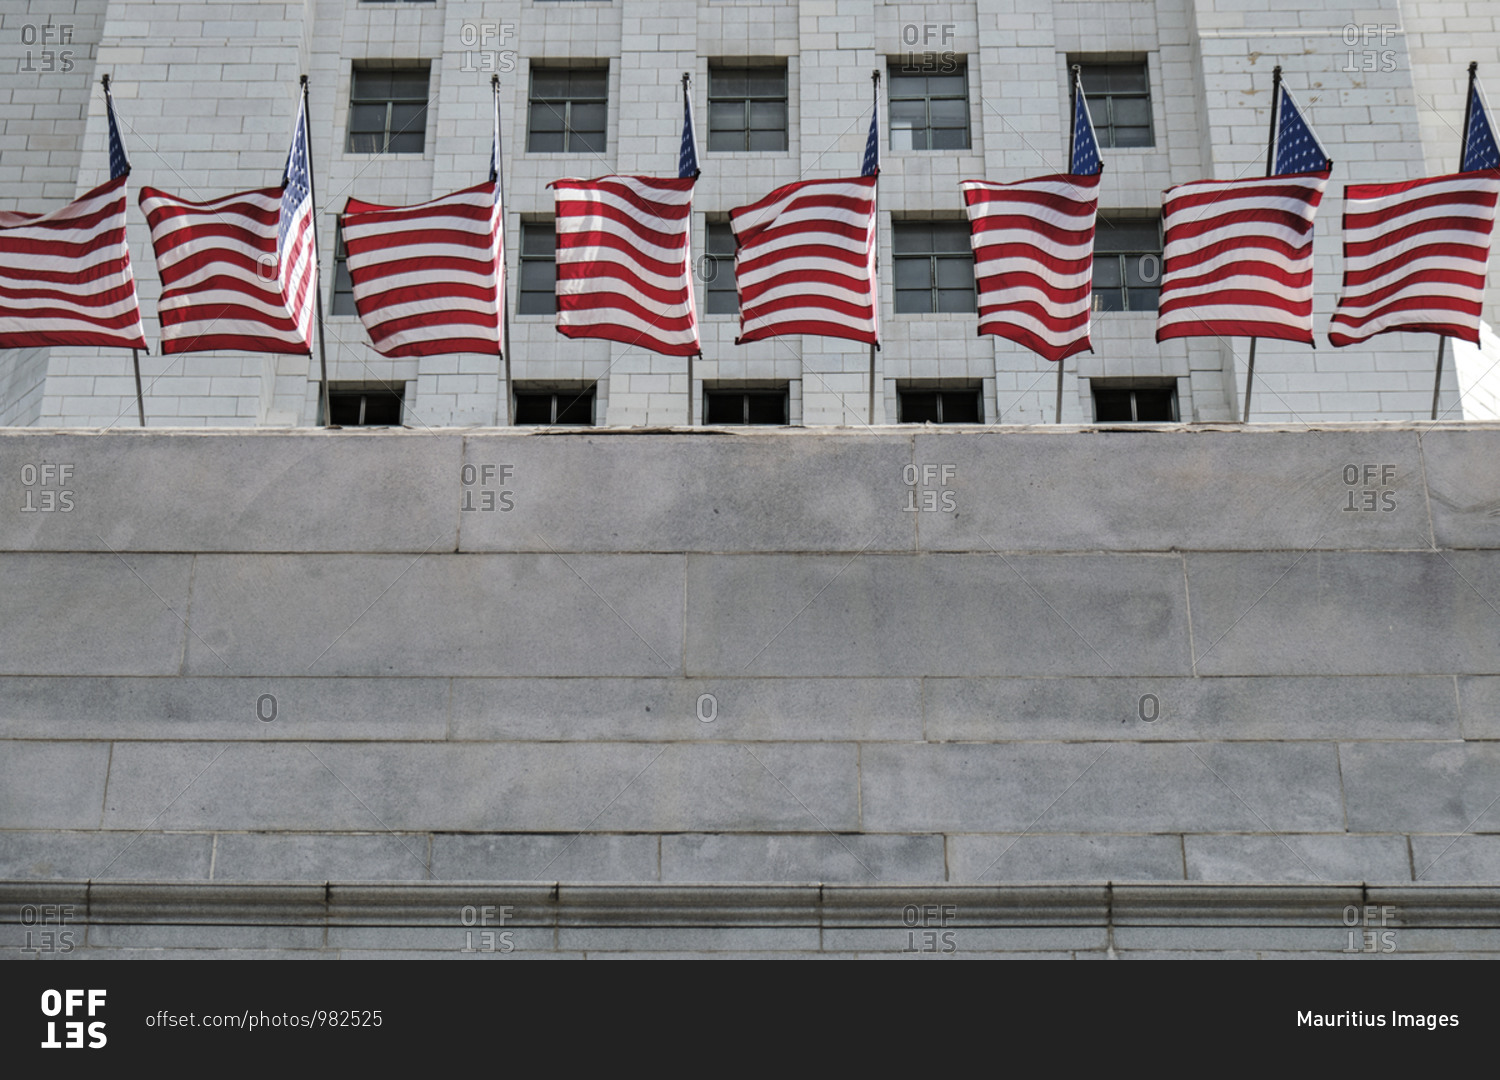 USA, United States of America, California, Los Angeles, Downtown, Chinatown, CBD, Central Business District, Superior Court, Court house, american flags,